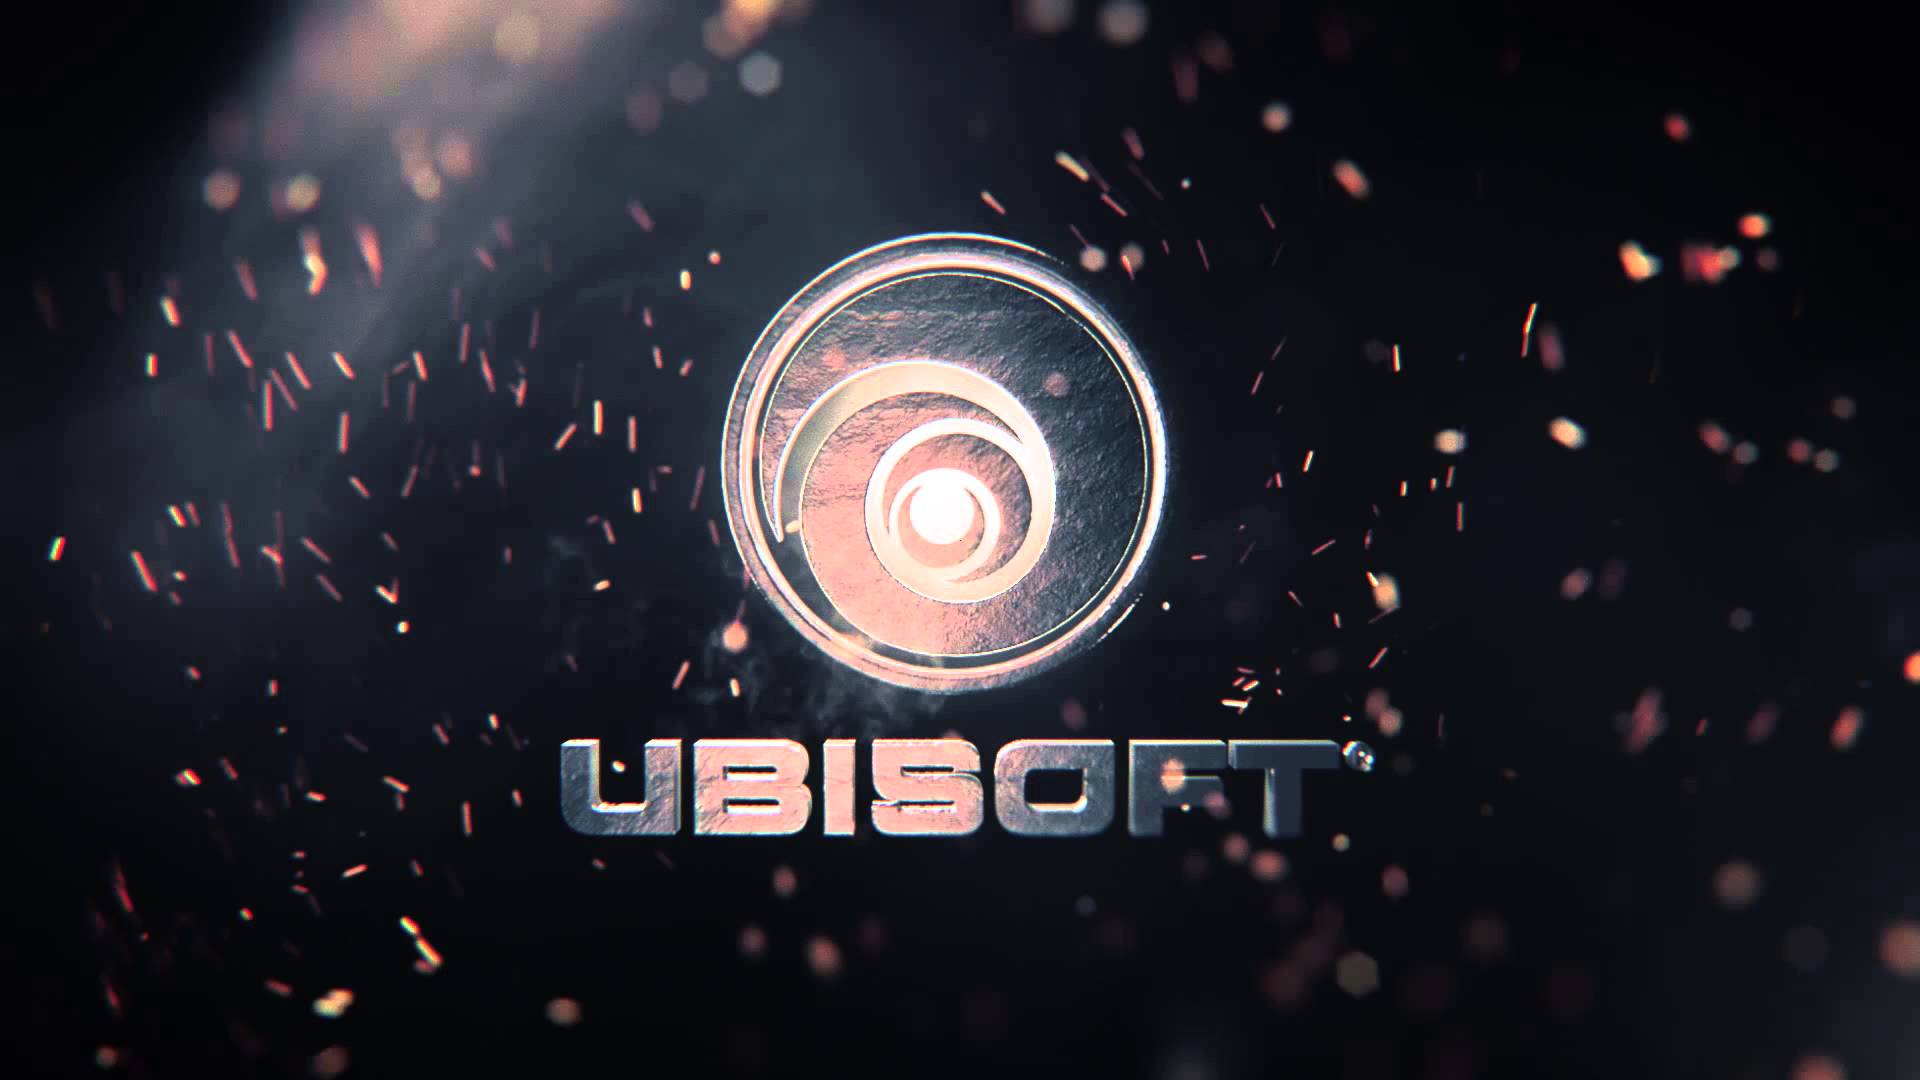 Ubisoft Might Reveal New “Small Scale RPG” At E3